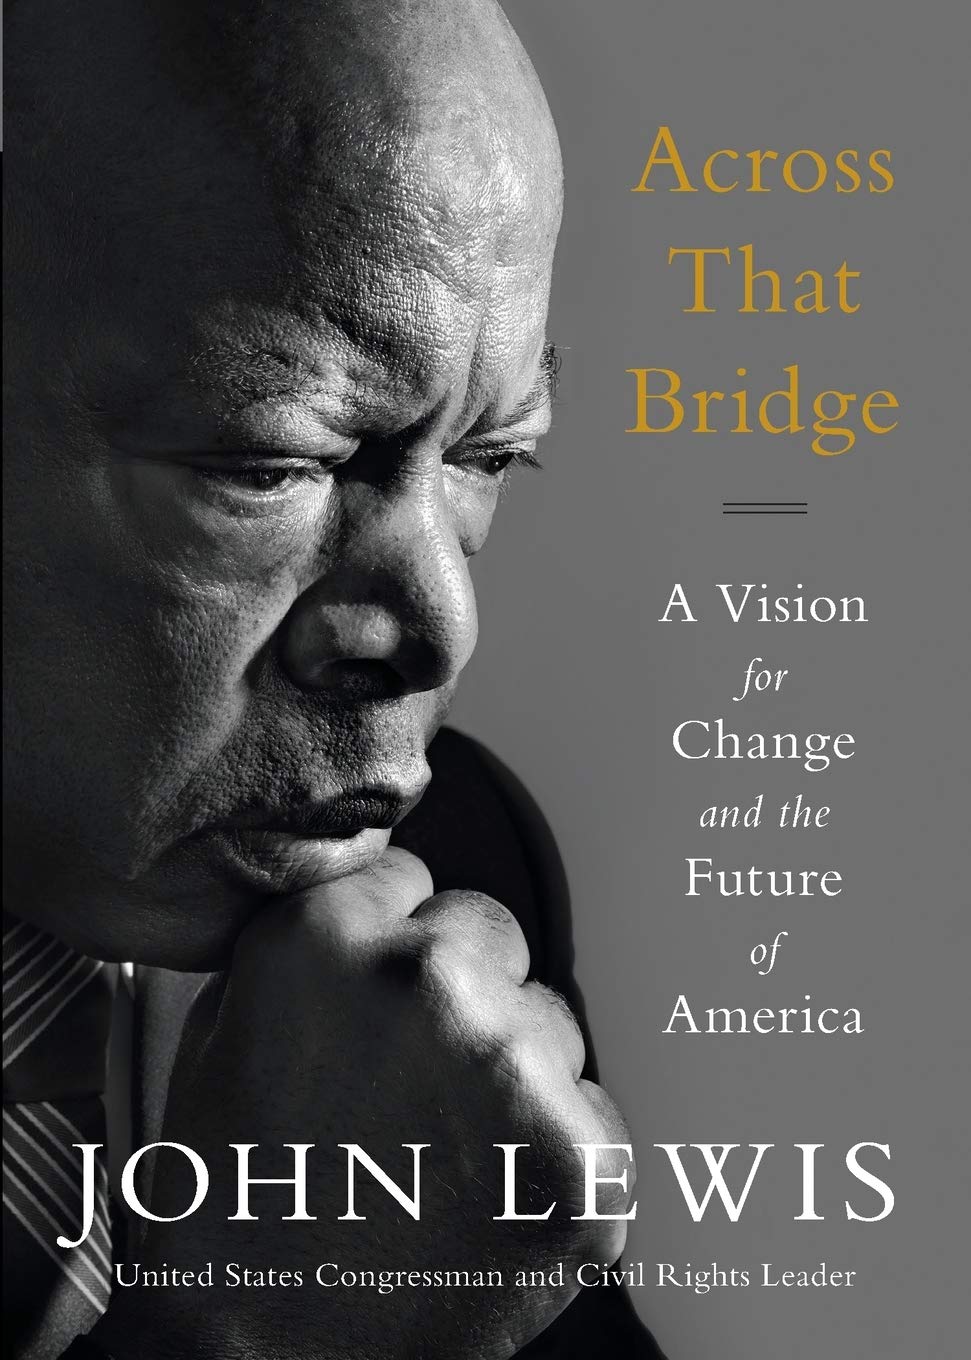 Across That Bridge // A Vision for Change and the Future of America